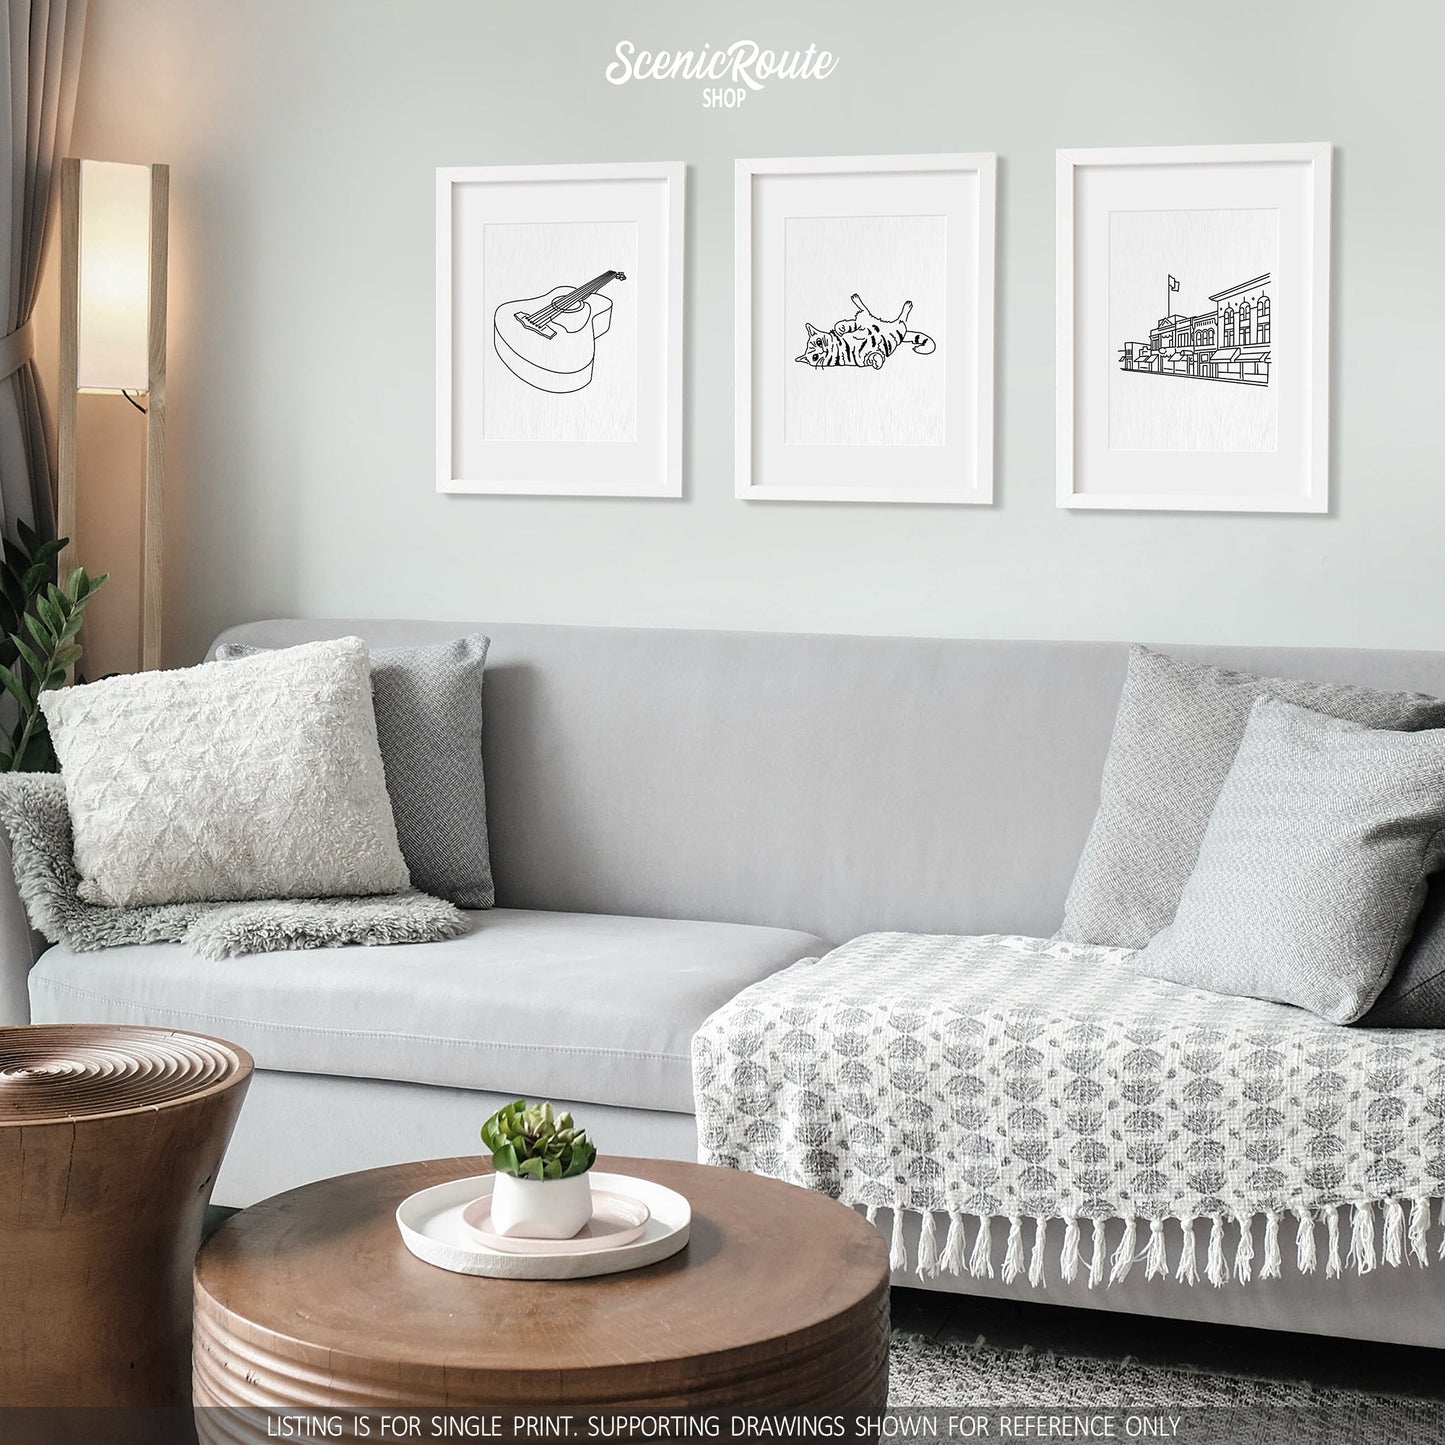 A group of three framed drawings on a white wall hanging above a couch with pillows and a blanket. The line art drawings include a Guitar, a Playful Cat, and the Prescott Skyline